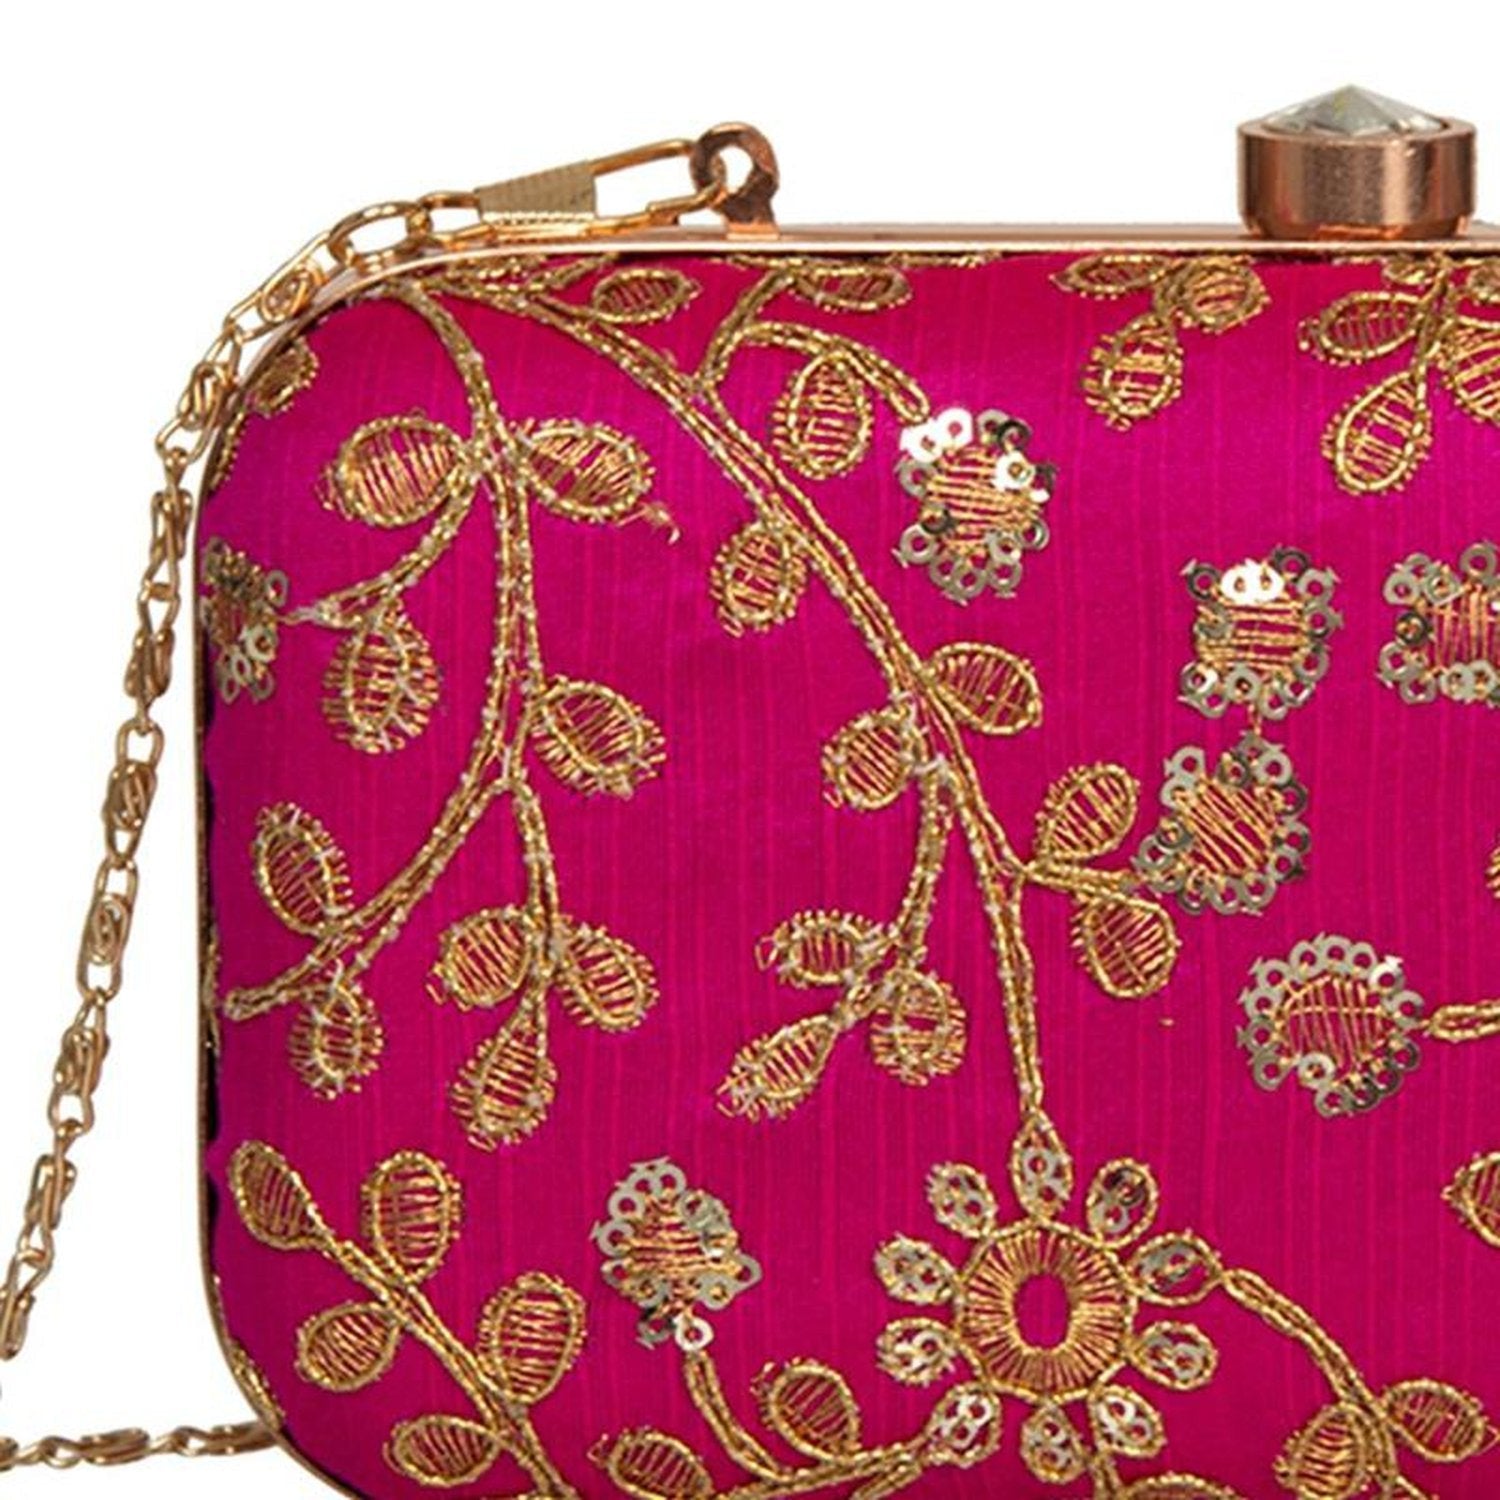 Bright Pink Metallic Pouch Shoulder Bag  New Look